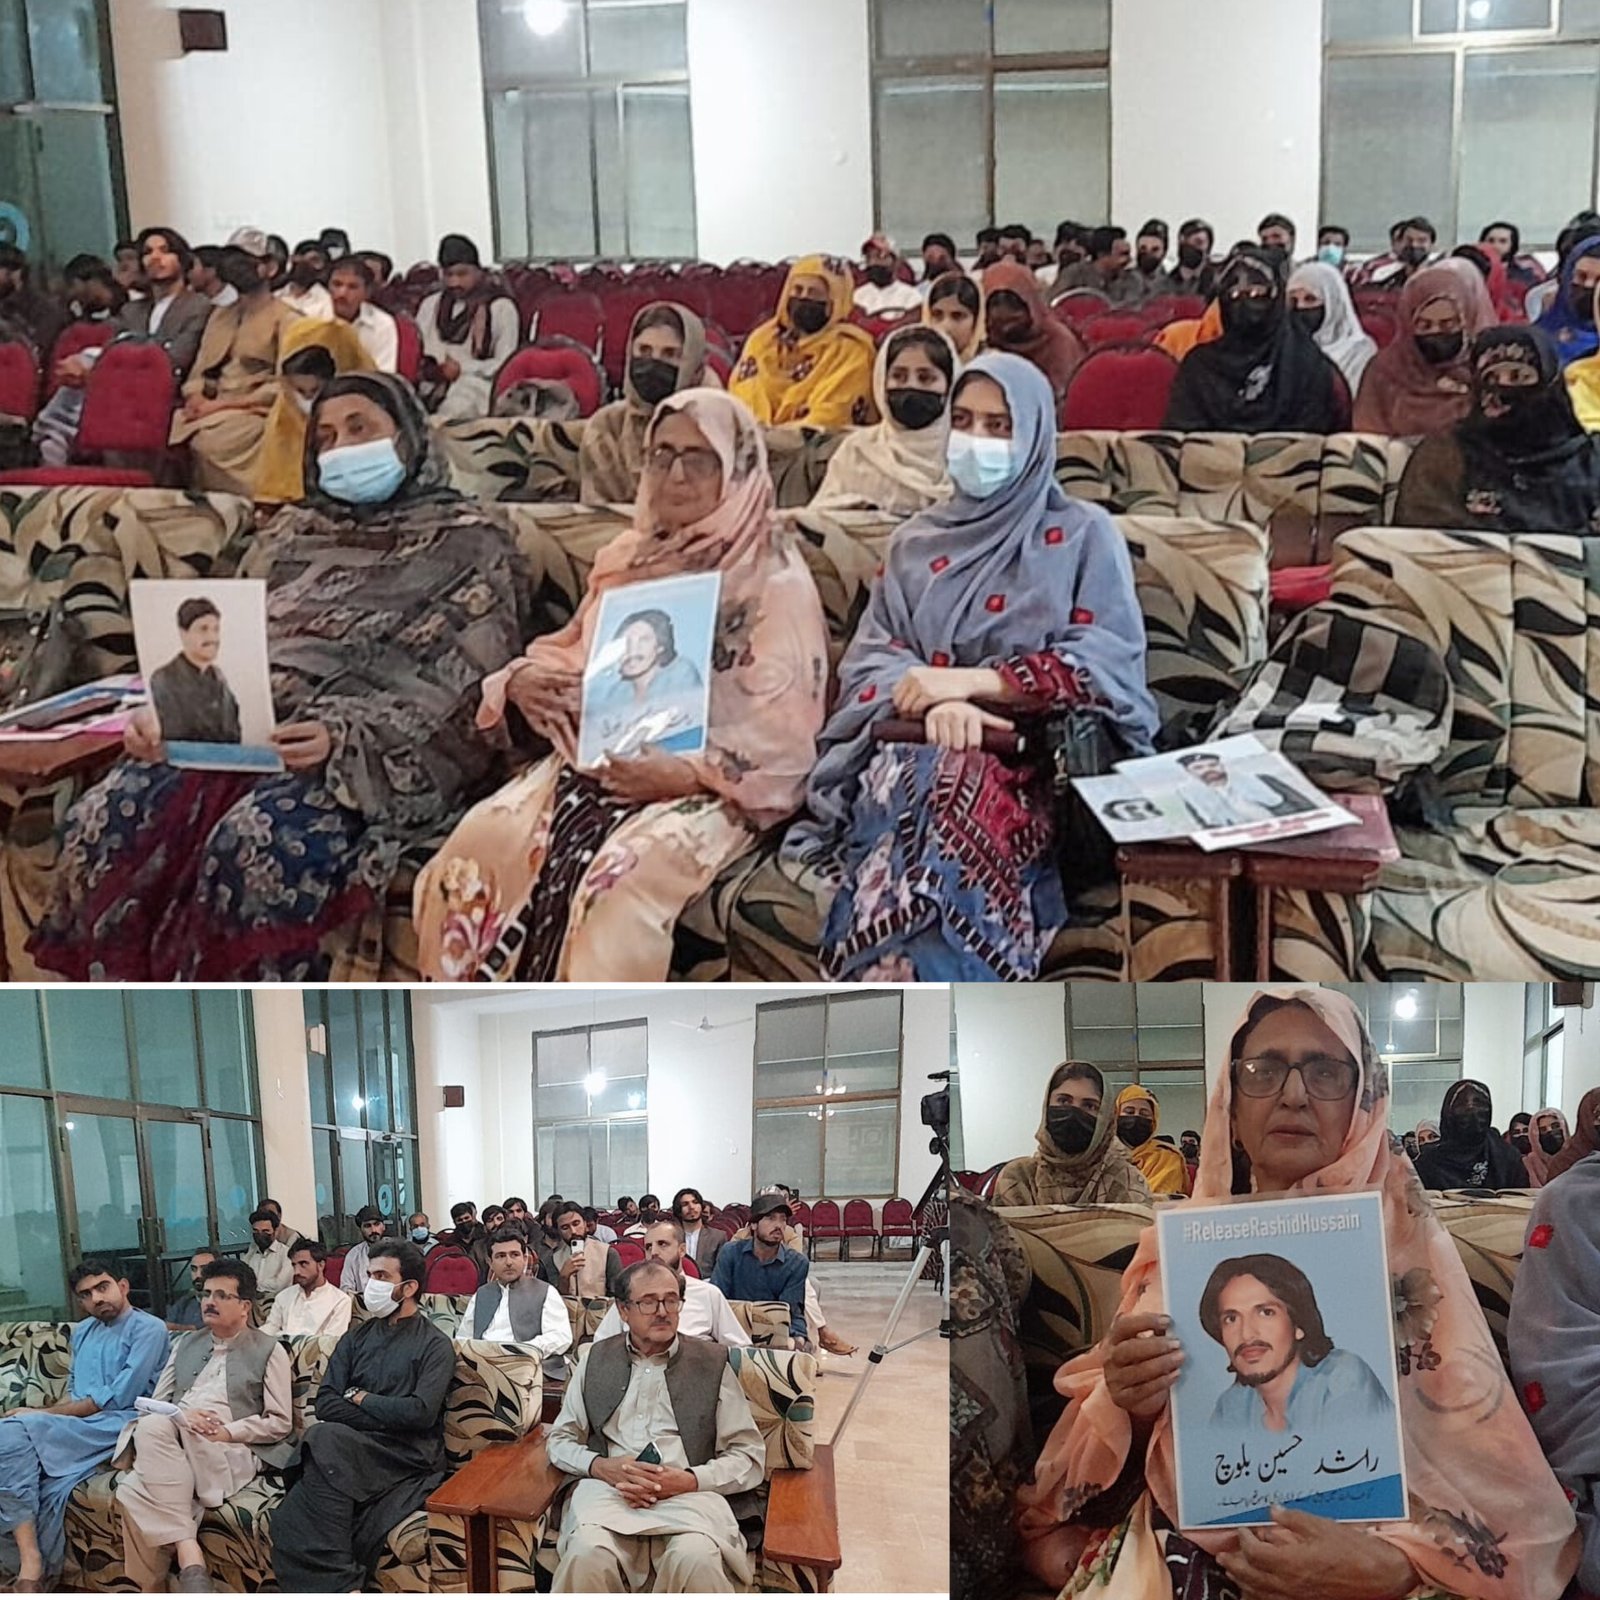 Quetta - Seminar held for the recovery of the Rashid Hussain | Zrumbesh